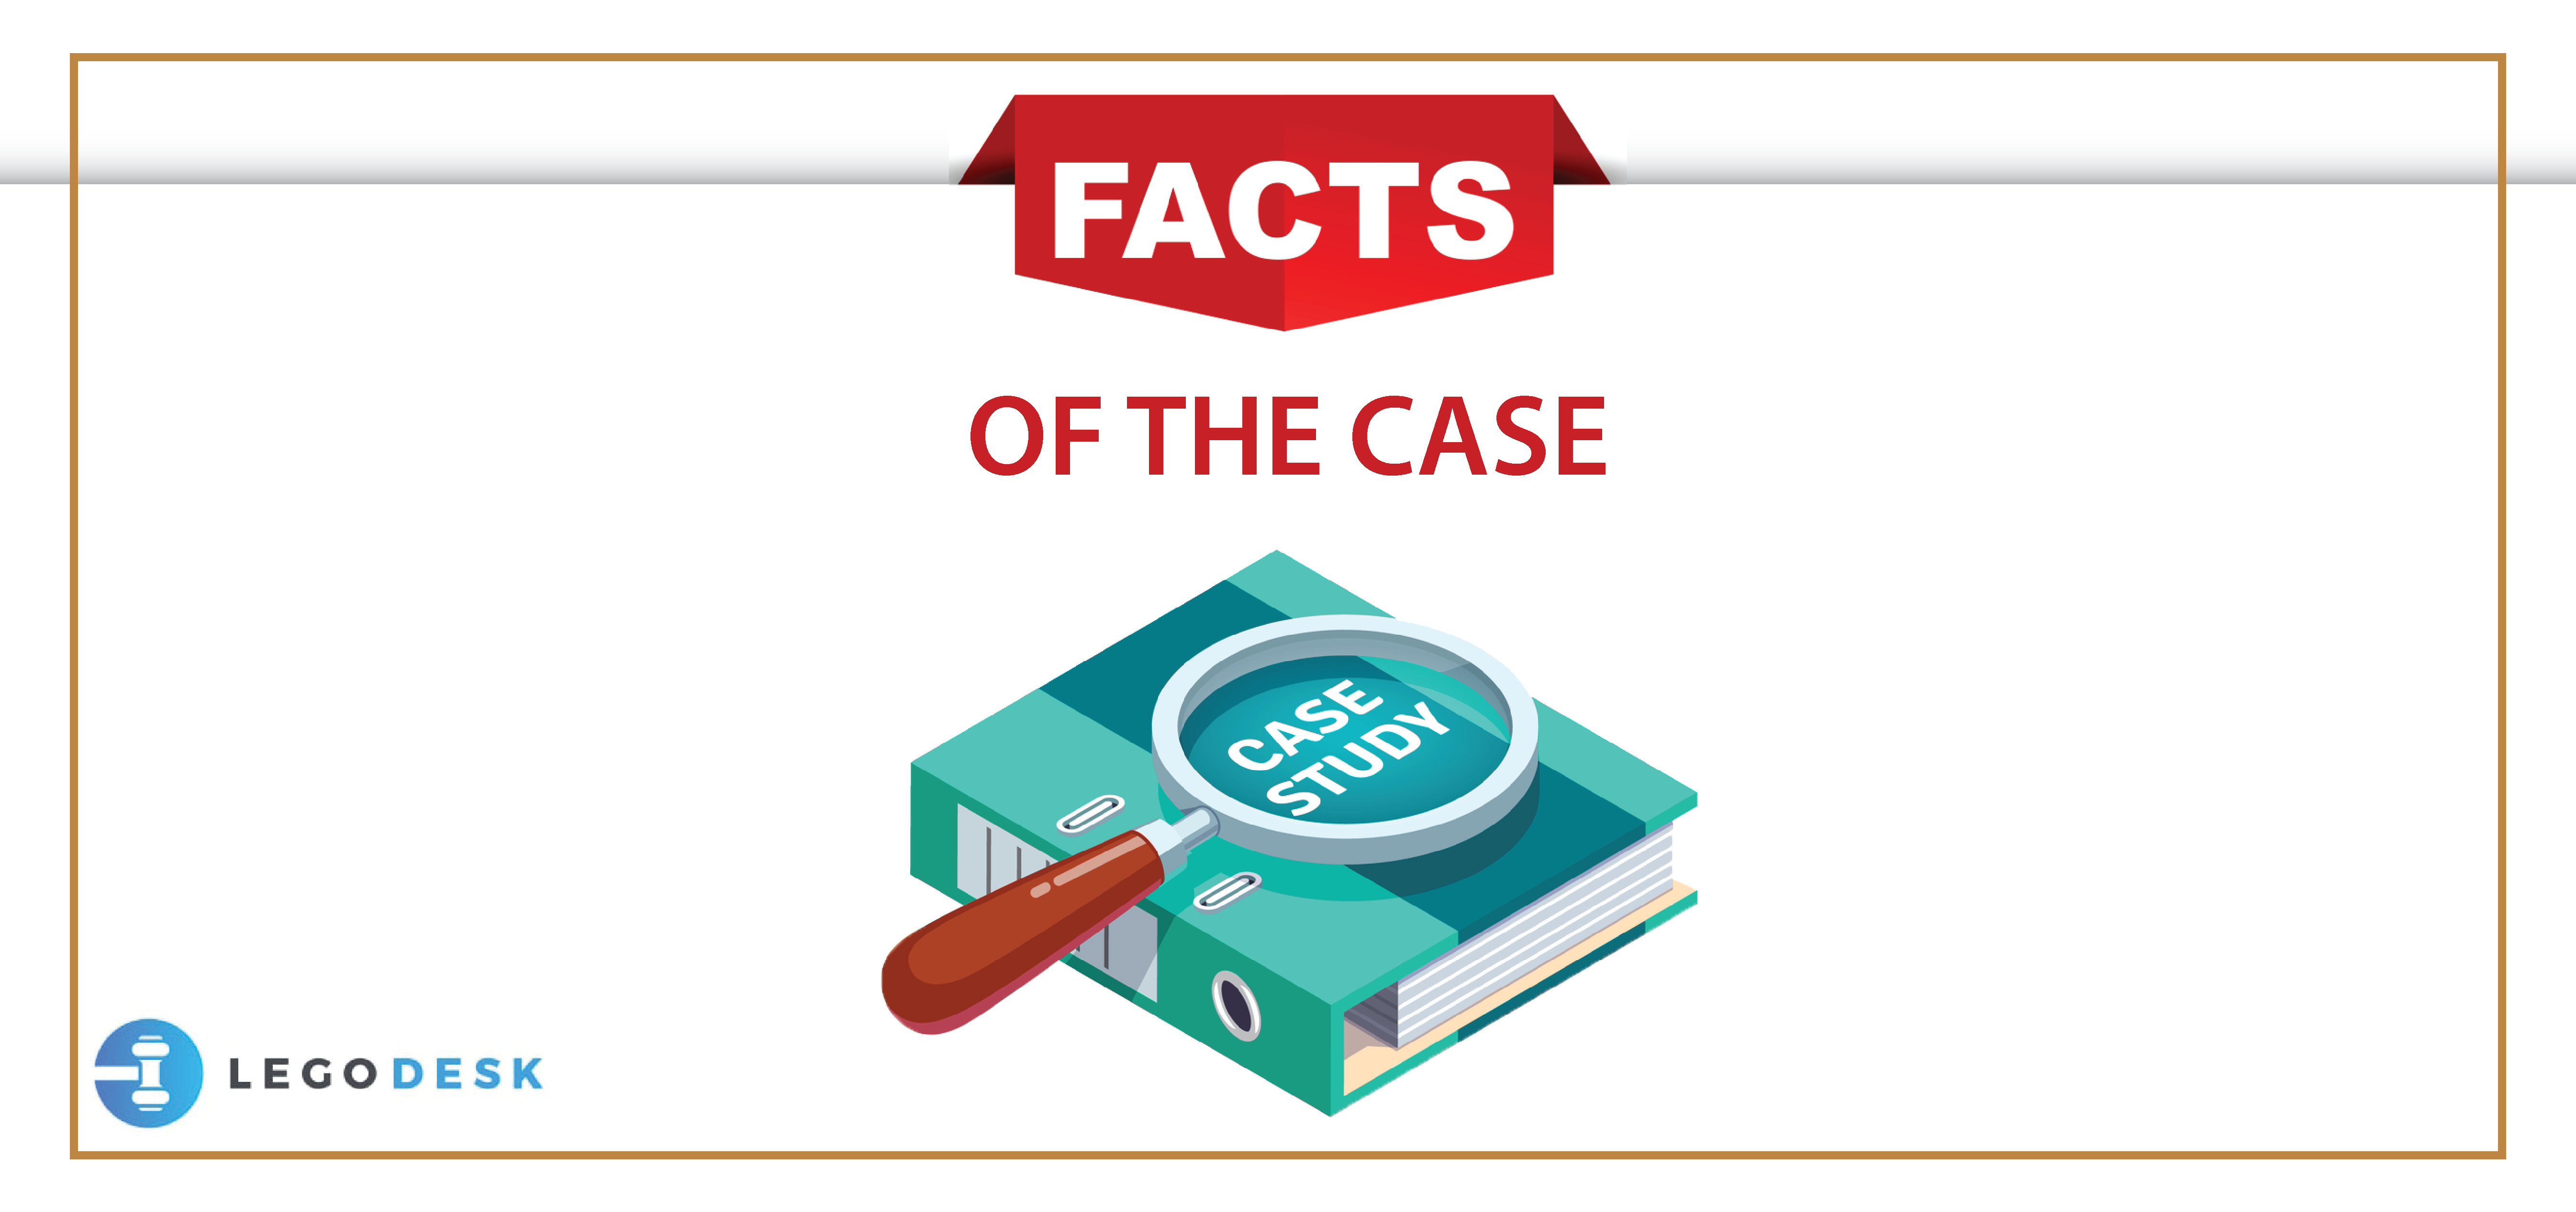 Everything You Need to Know About Facts of the Case